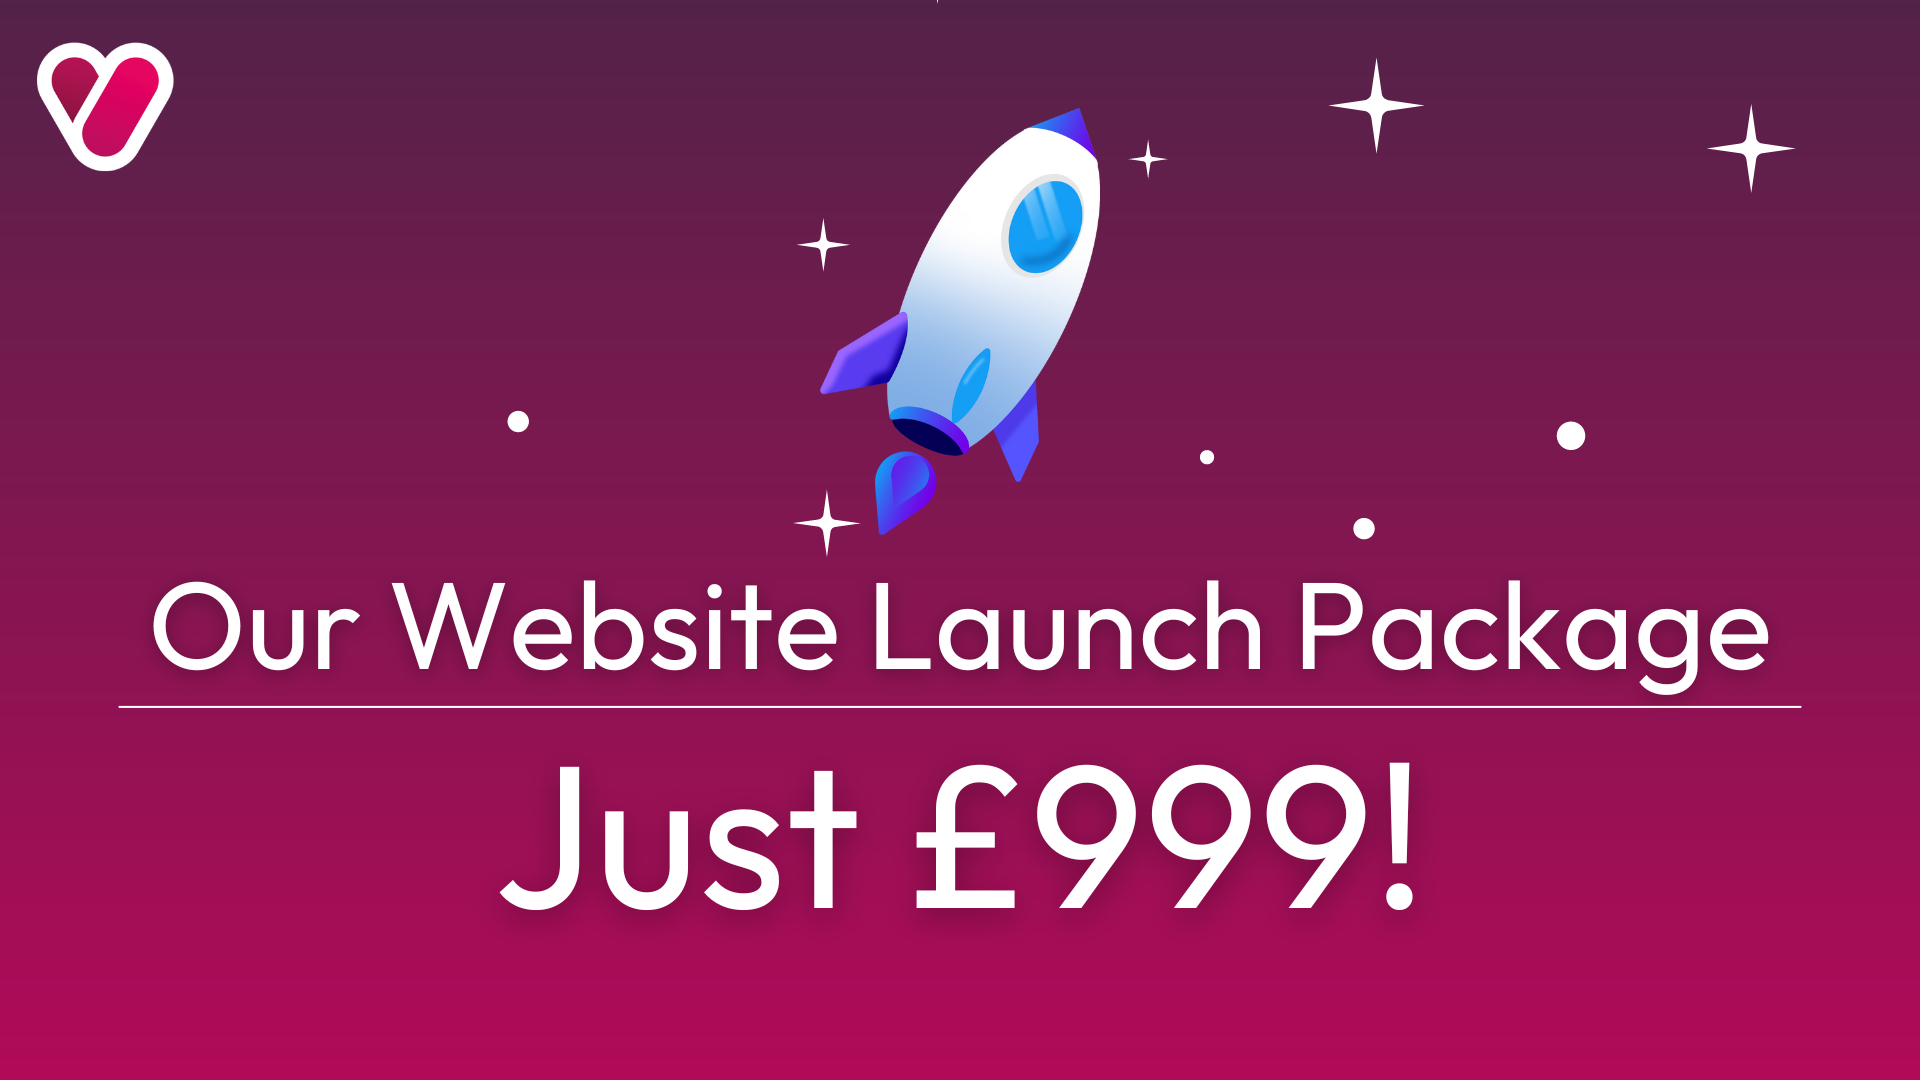 Our website launch package graphic with rocket and stars